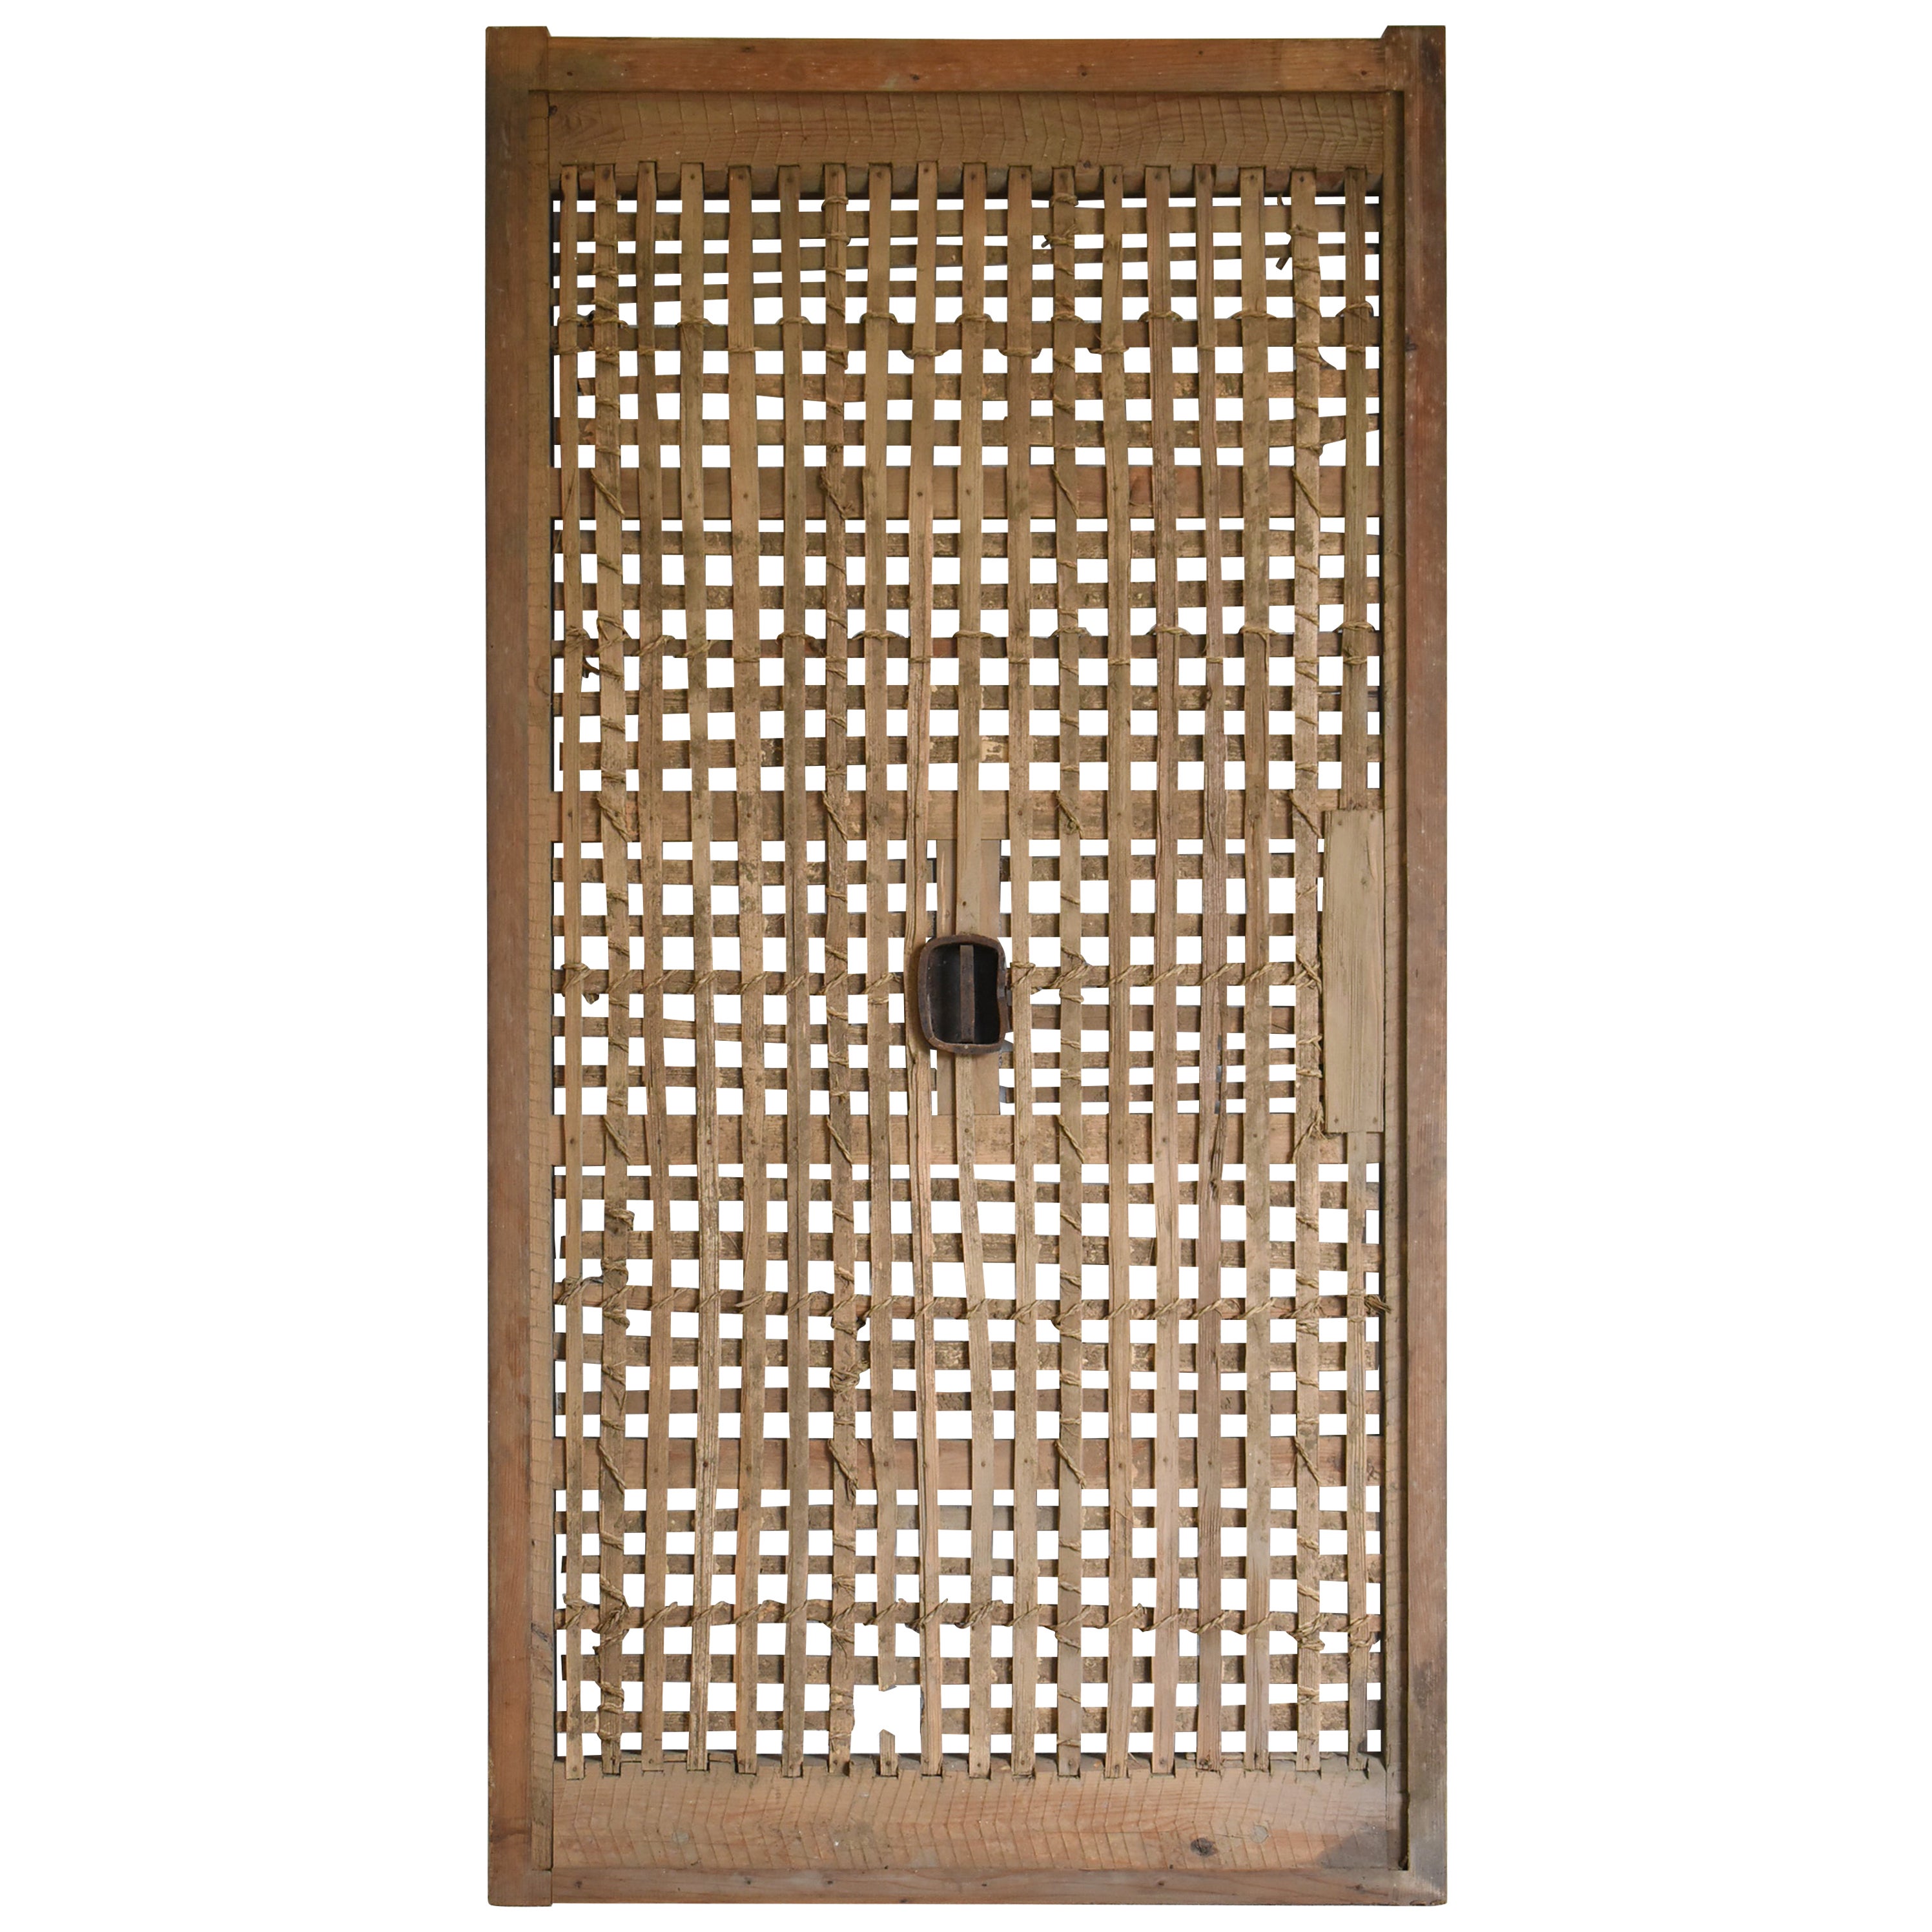 Japanese Antique Bamboo Lathing Door 1860s-1900s / Abstract Art Wabi Sabi For Sale